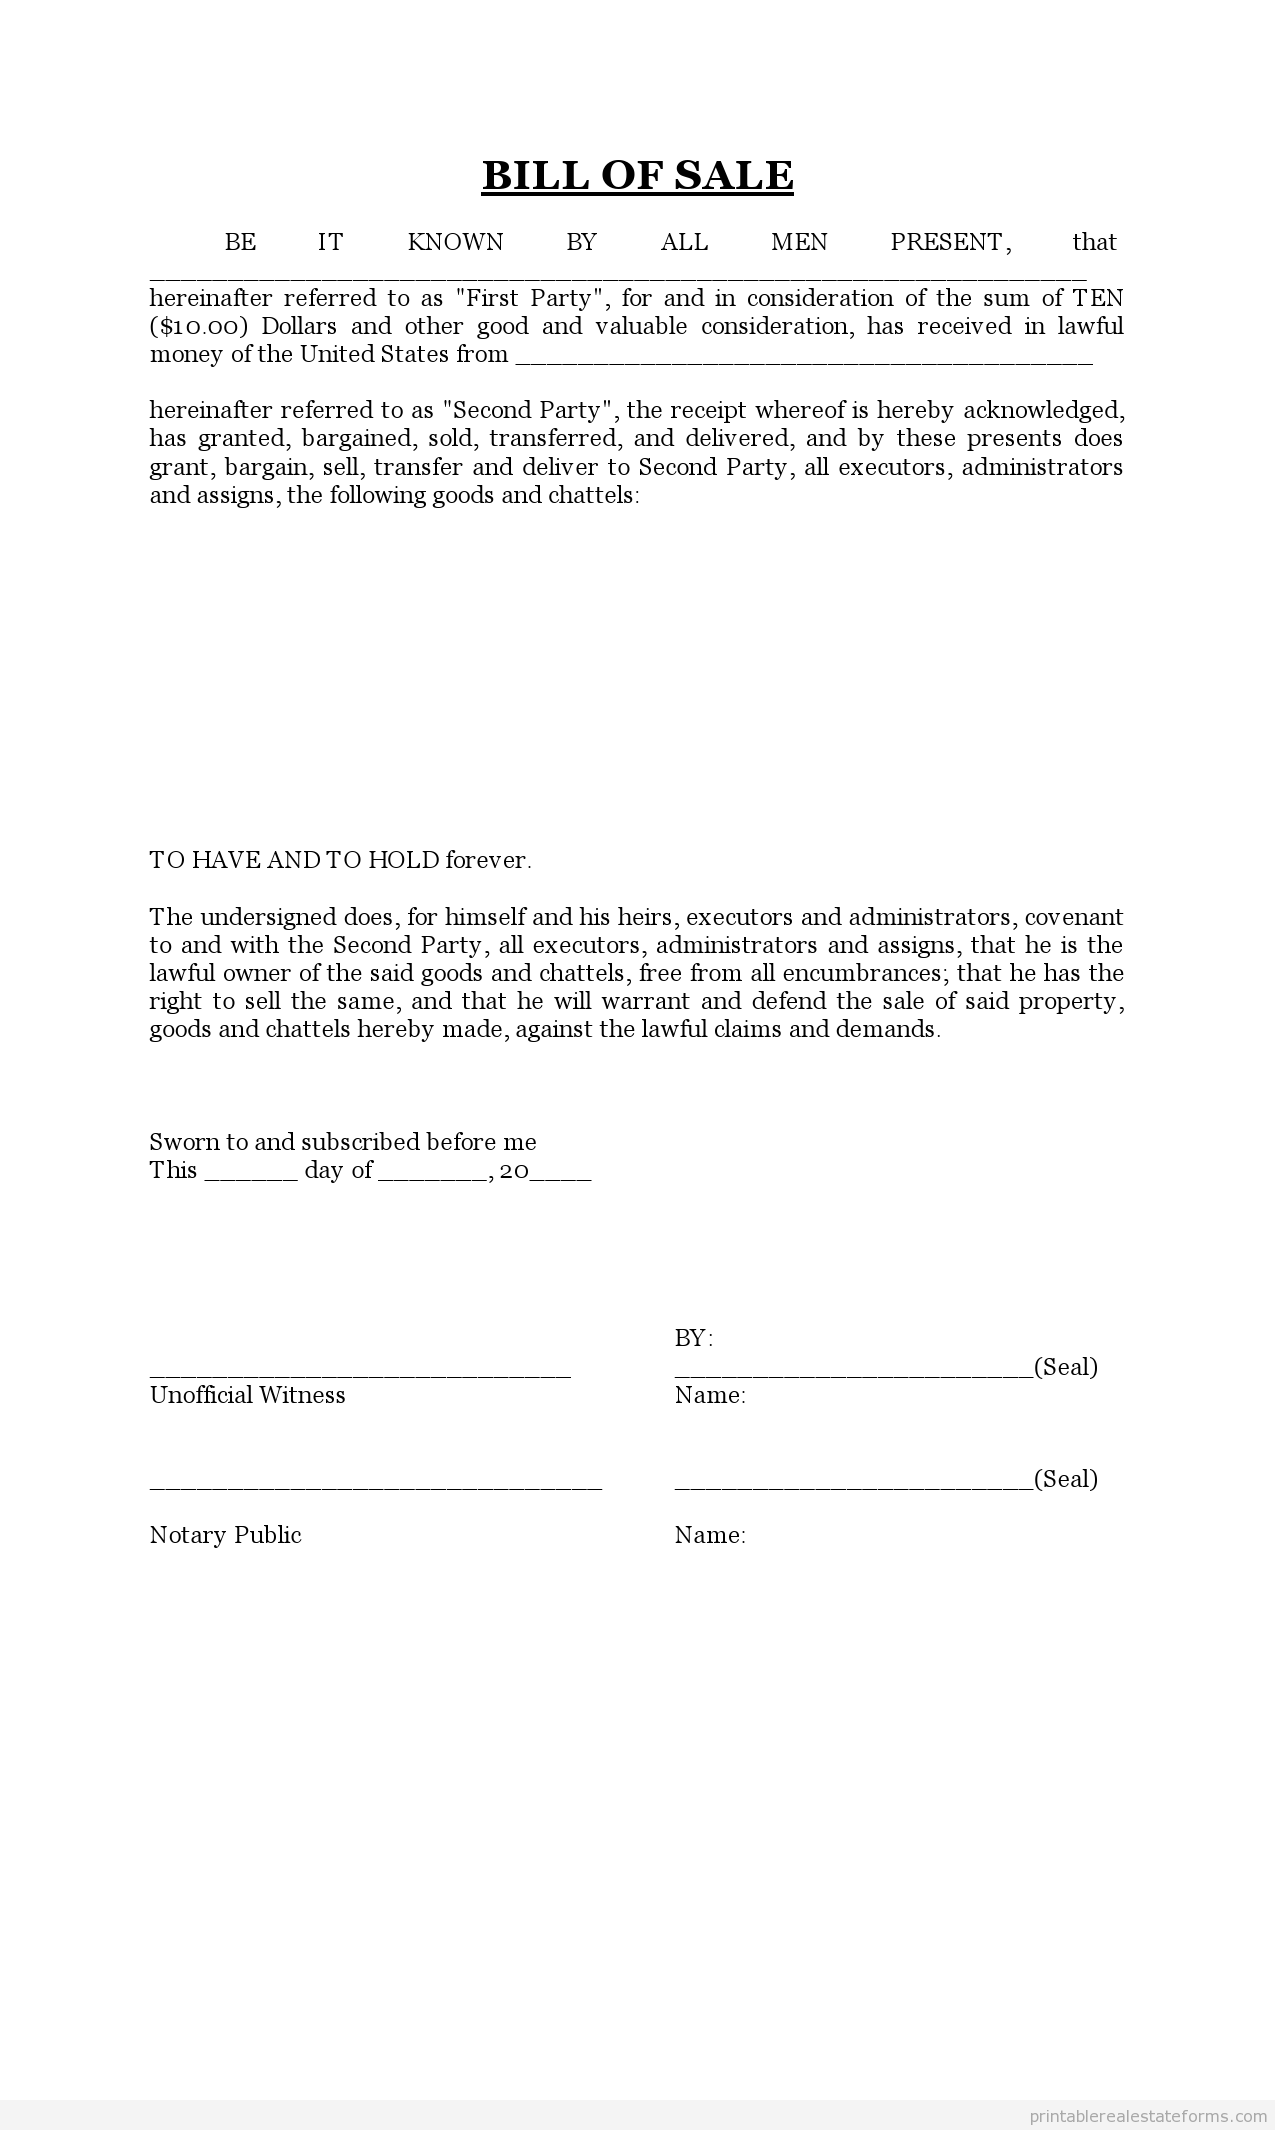 free-printable-bill-of-sale-form-word-template